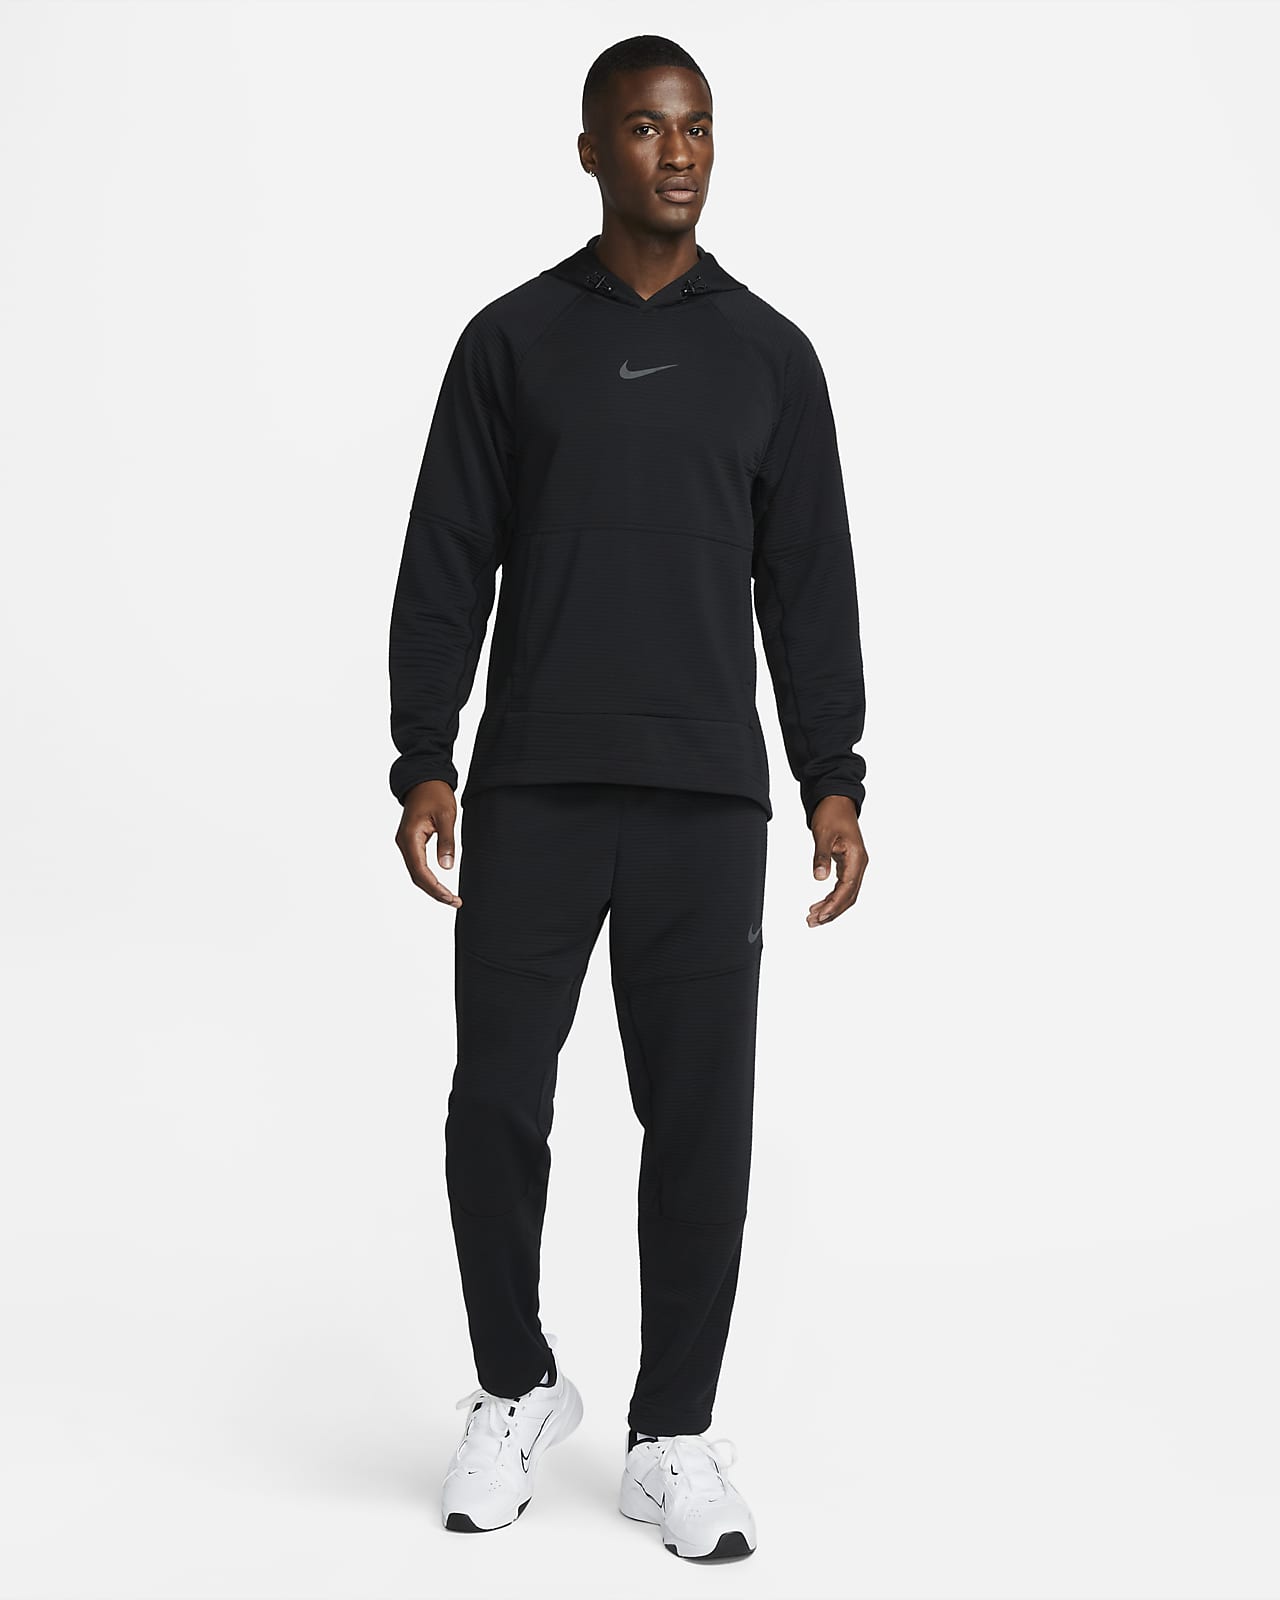 Nike Dri-FIT Sweat Pants he Nike Dri-FIT Pants are made with 100%  sustainable materials, using a blend of both recycled polyester and organic  cotton fibers. The blend is at least 10% recycled